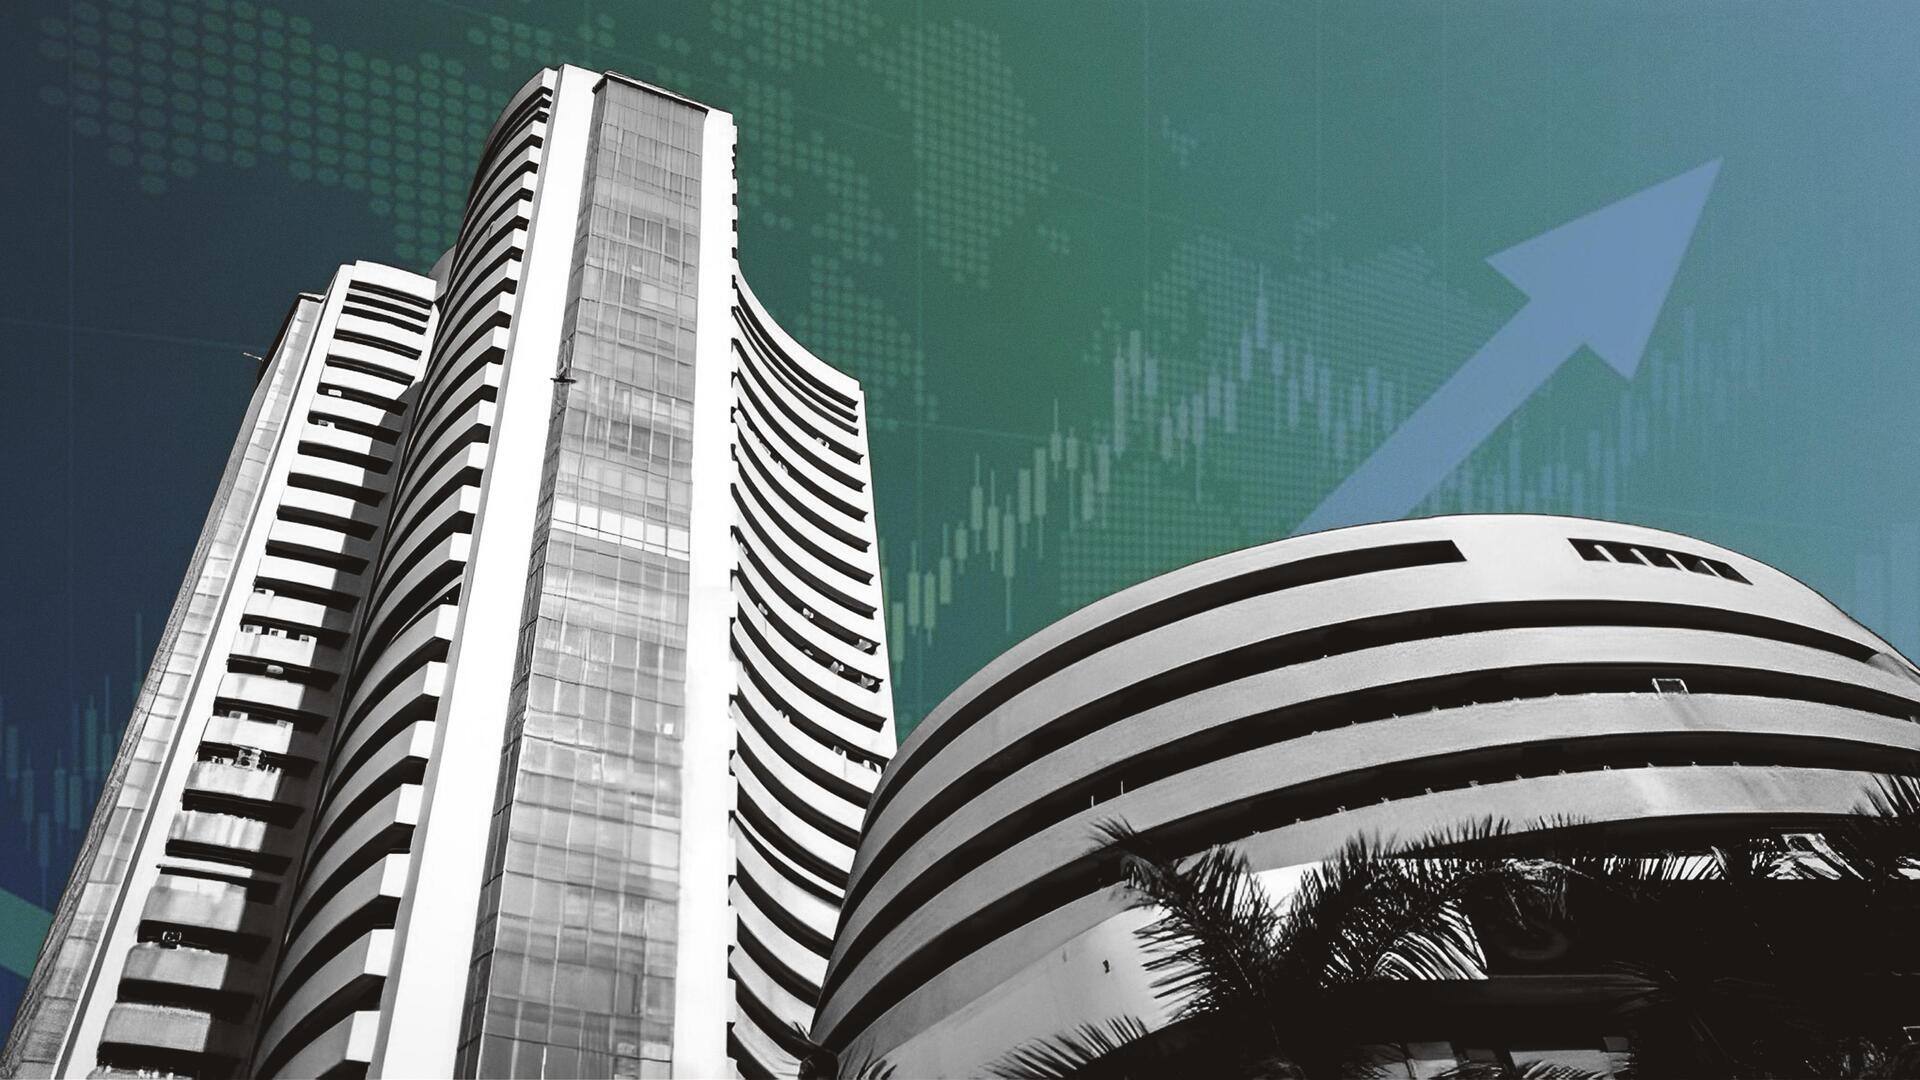 Sensex and Nifty 50 trade higher on positive global cues; metals and autos lose steam